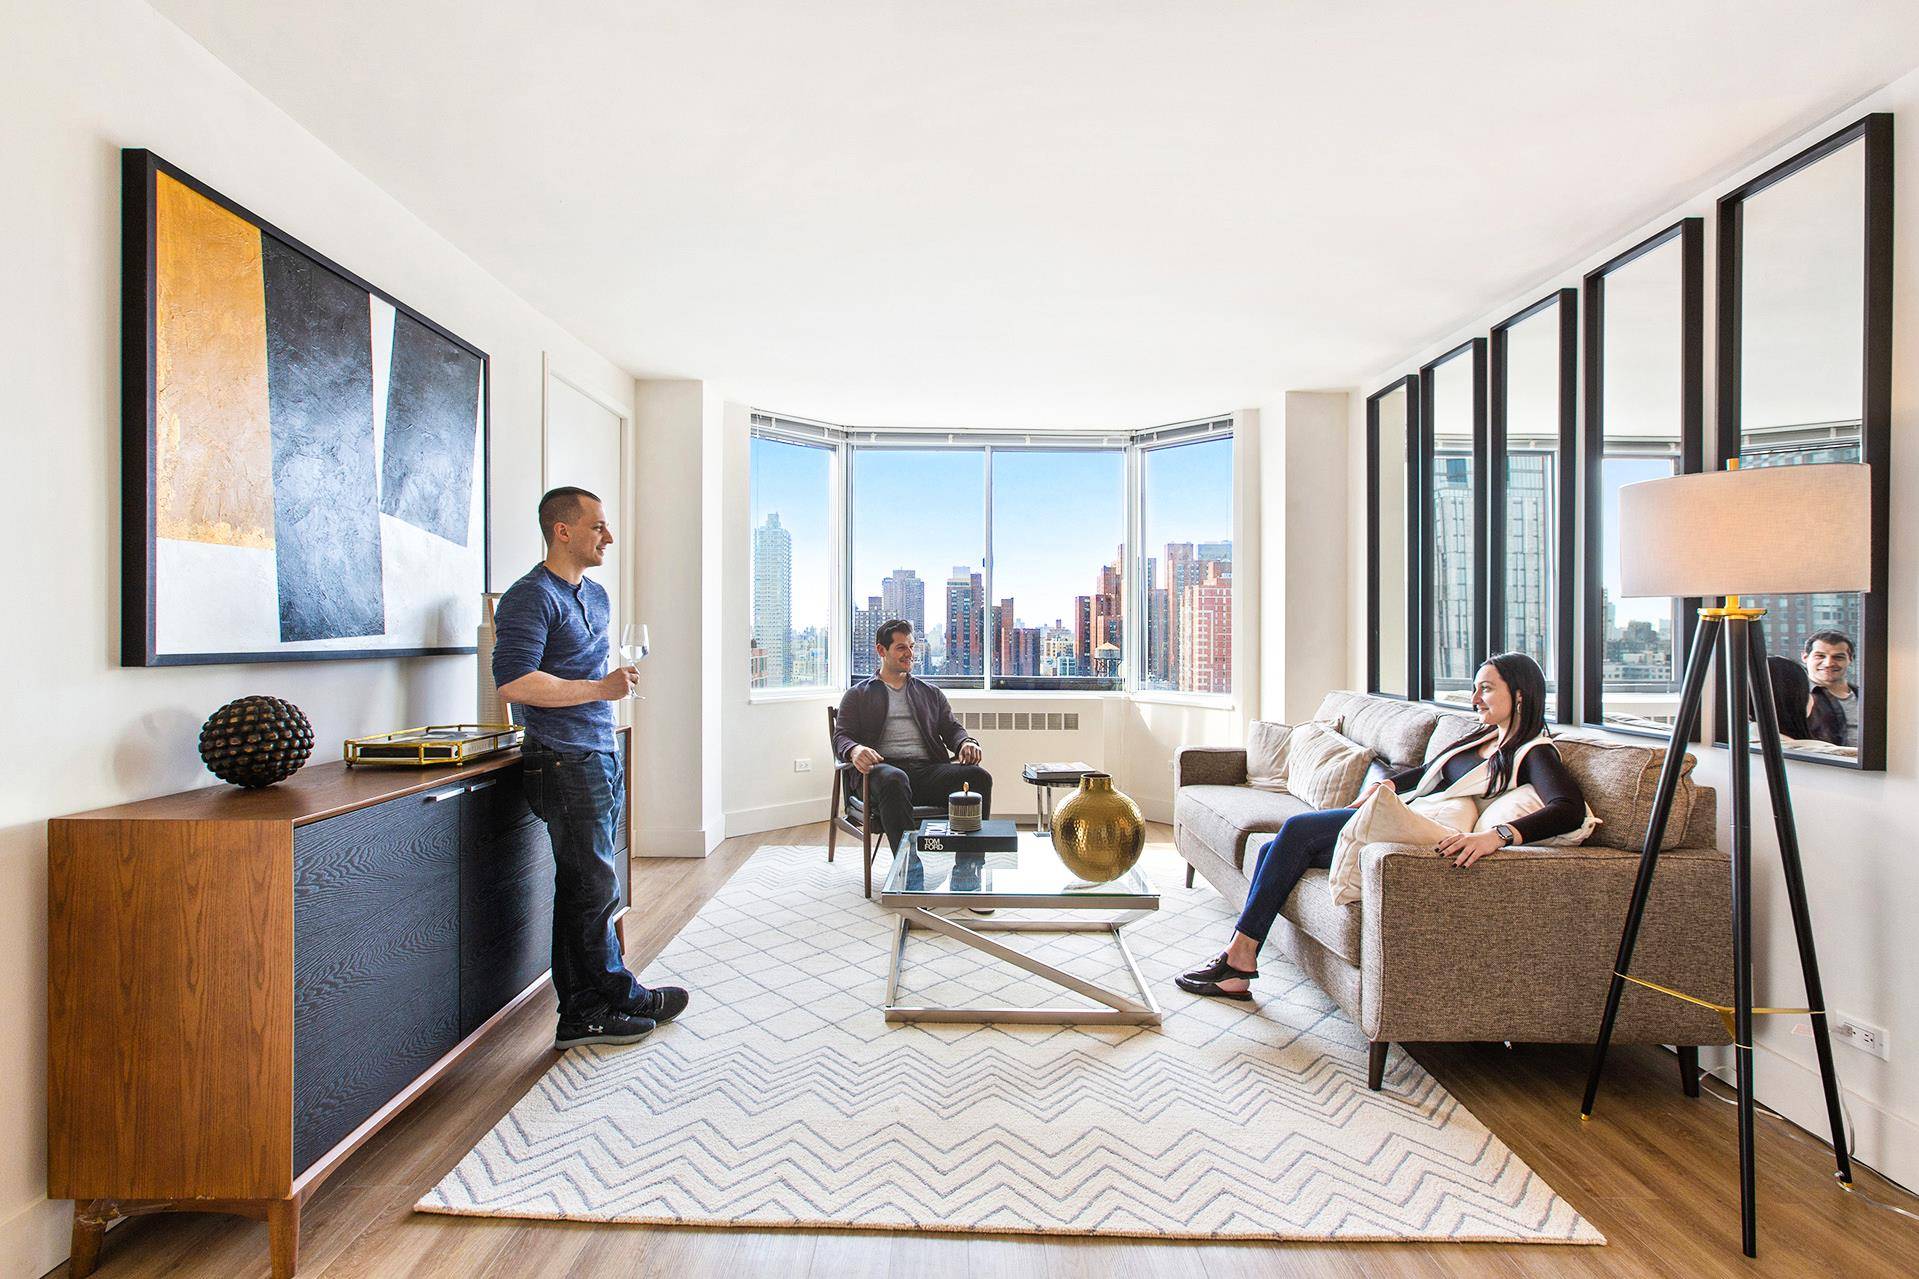 The Serrano is a coveted luxury high rise located in the upscale Upper East Side neighborhood of Manhattan.